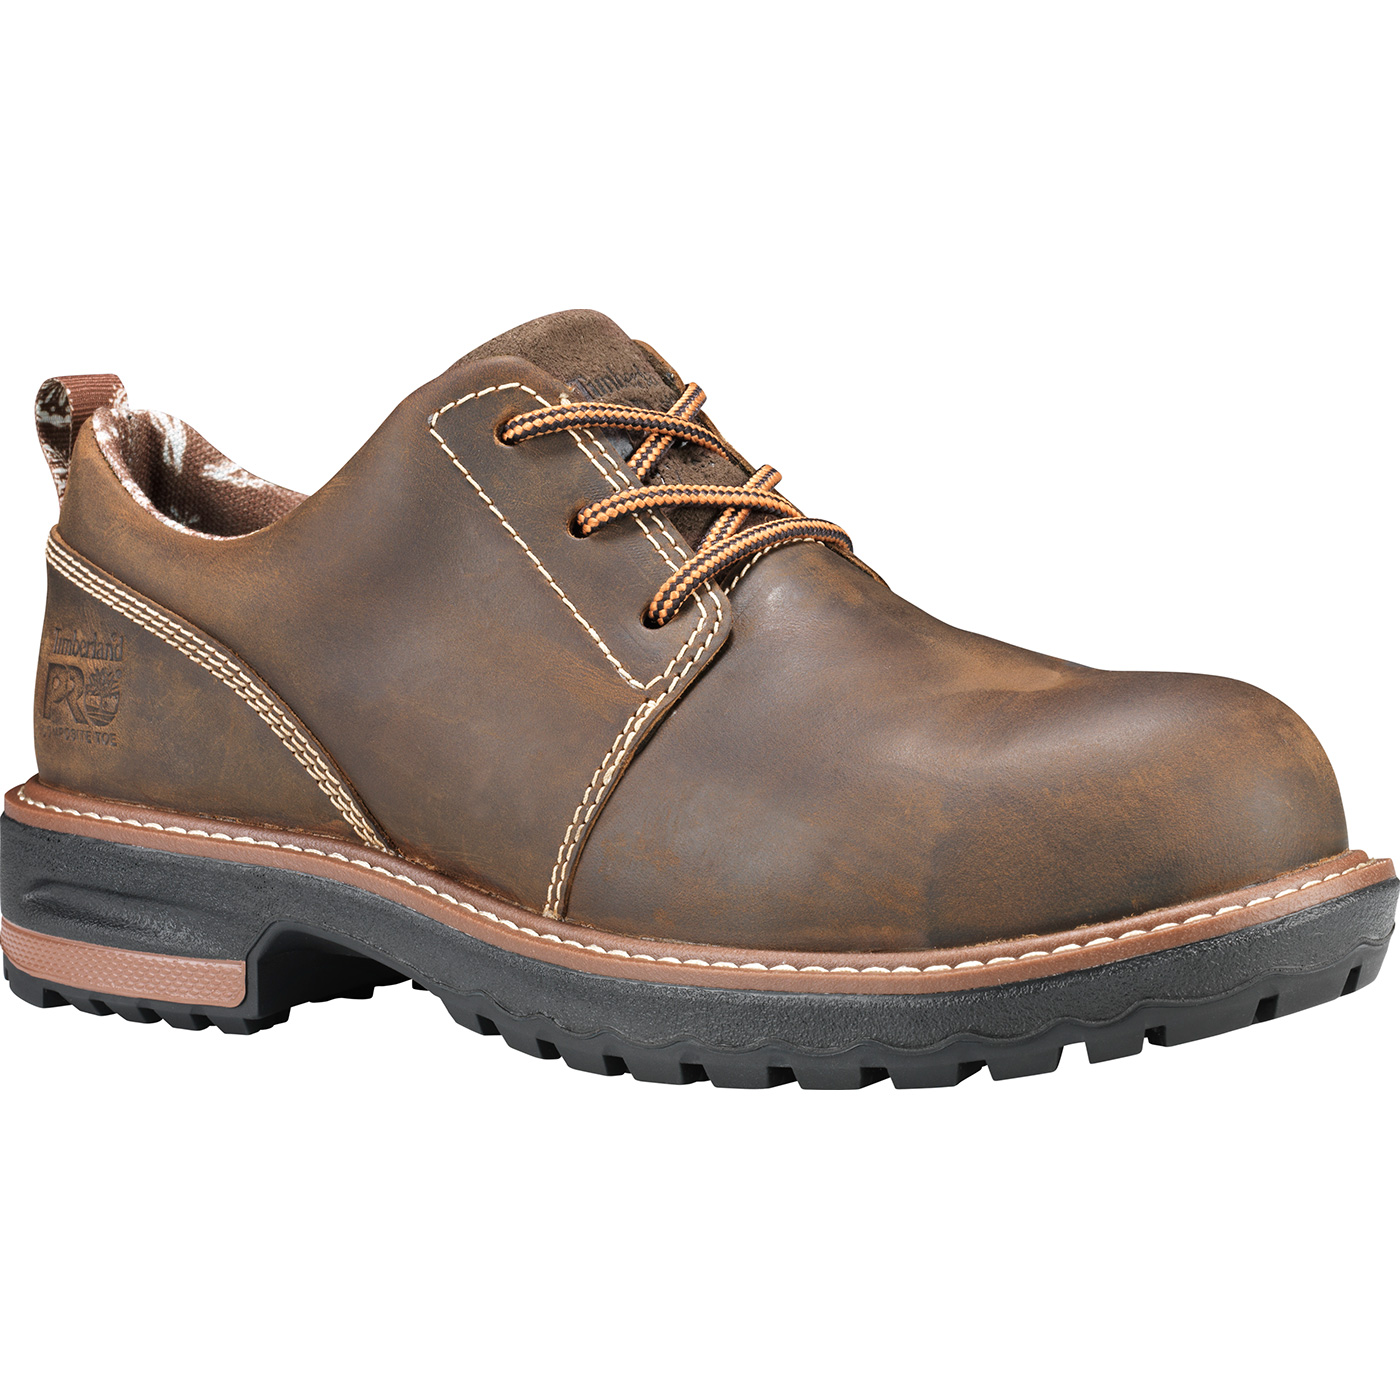 Buy the Timberland PRO Hightower Women's Composite Toe Electrical ...